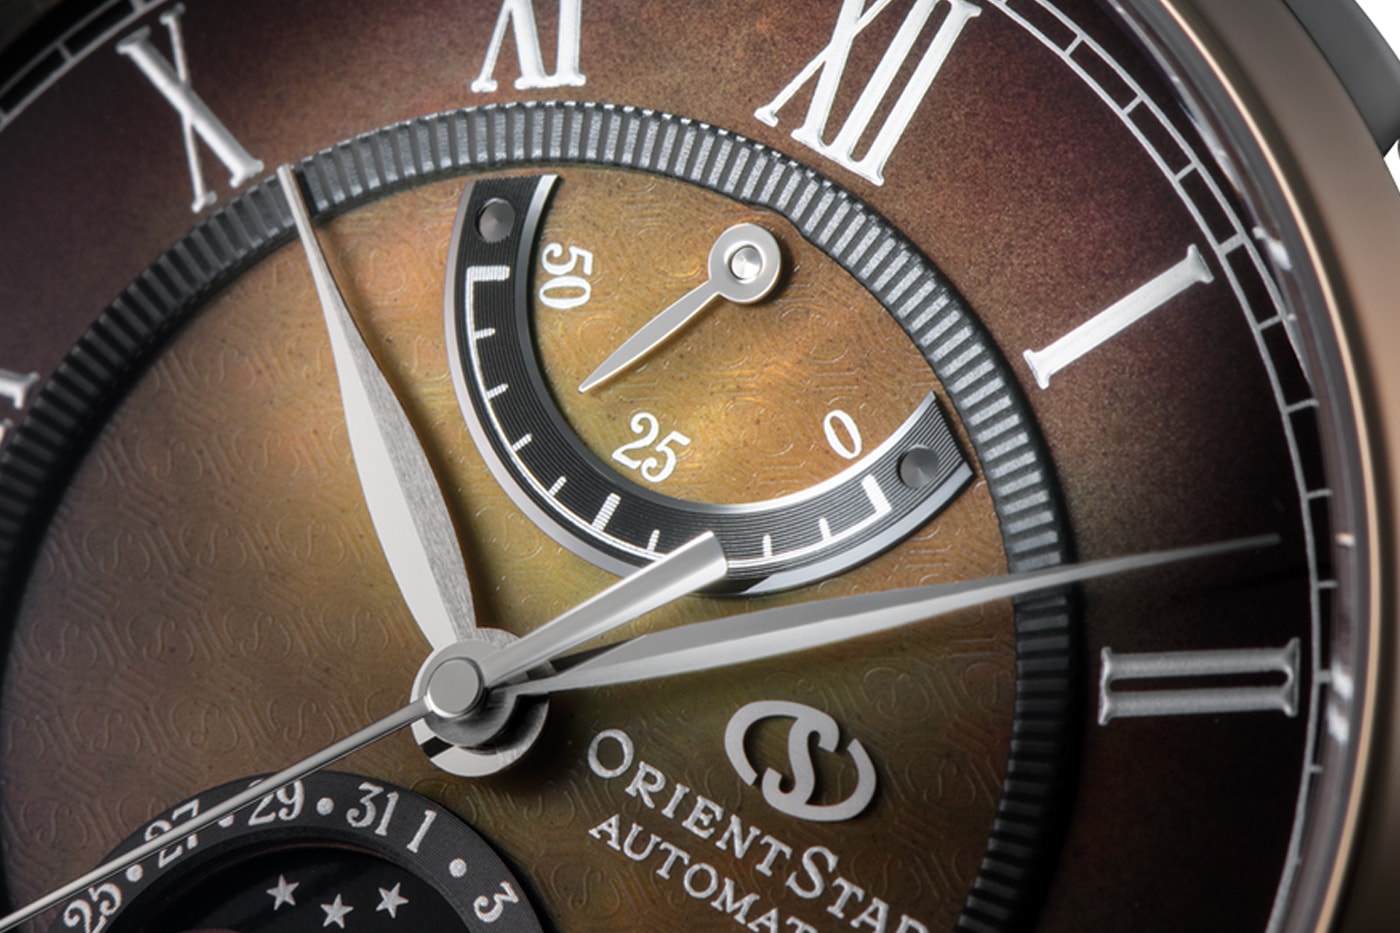 Orient Star M45 F7 Mechanical Moon Phase Limited Edition Release Info